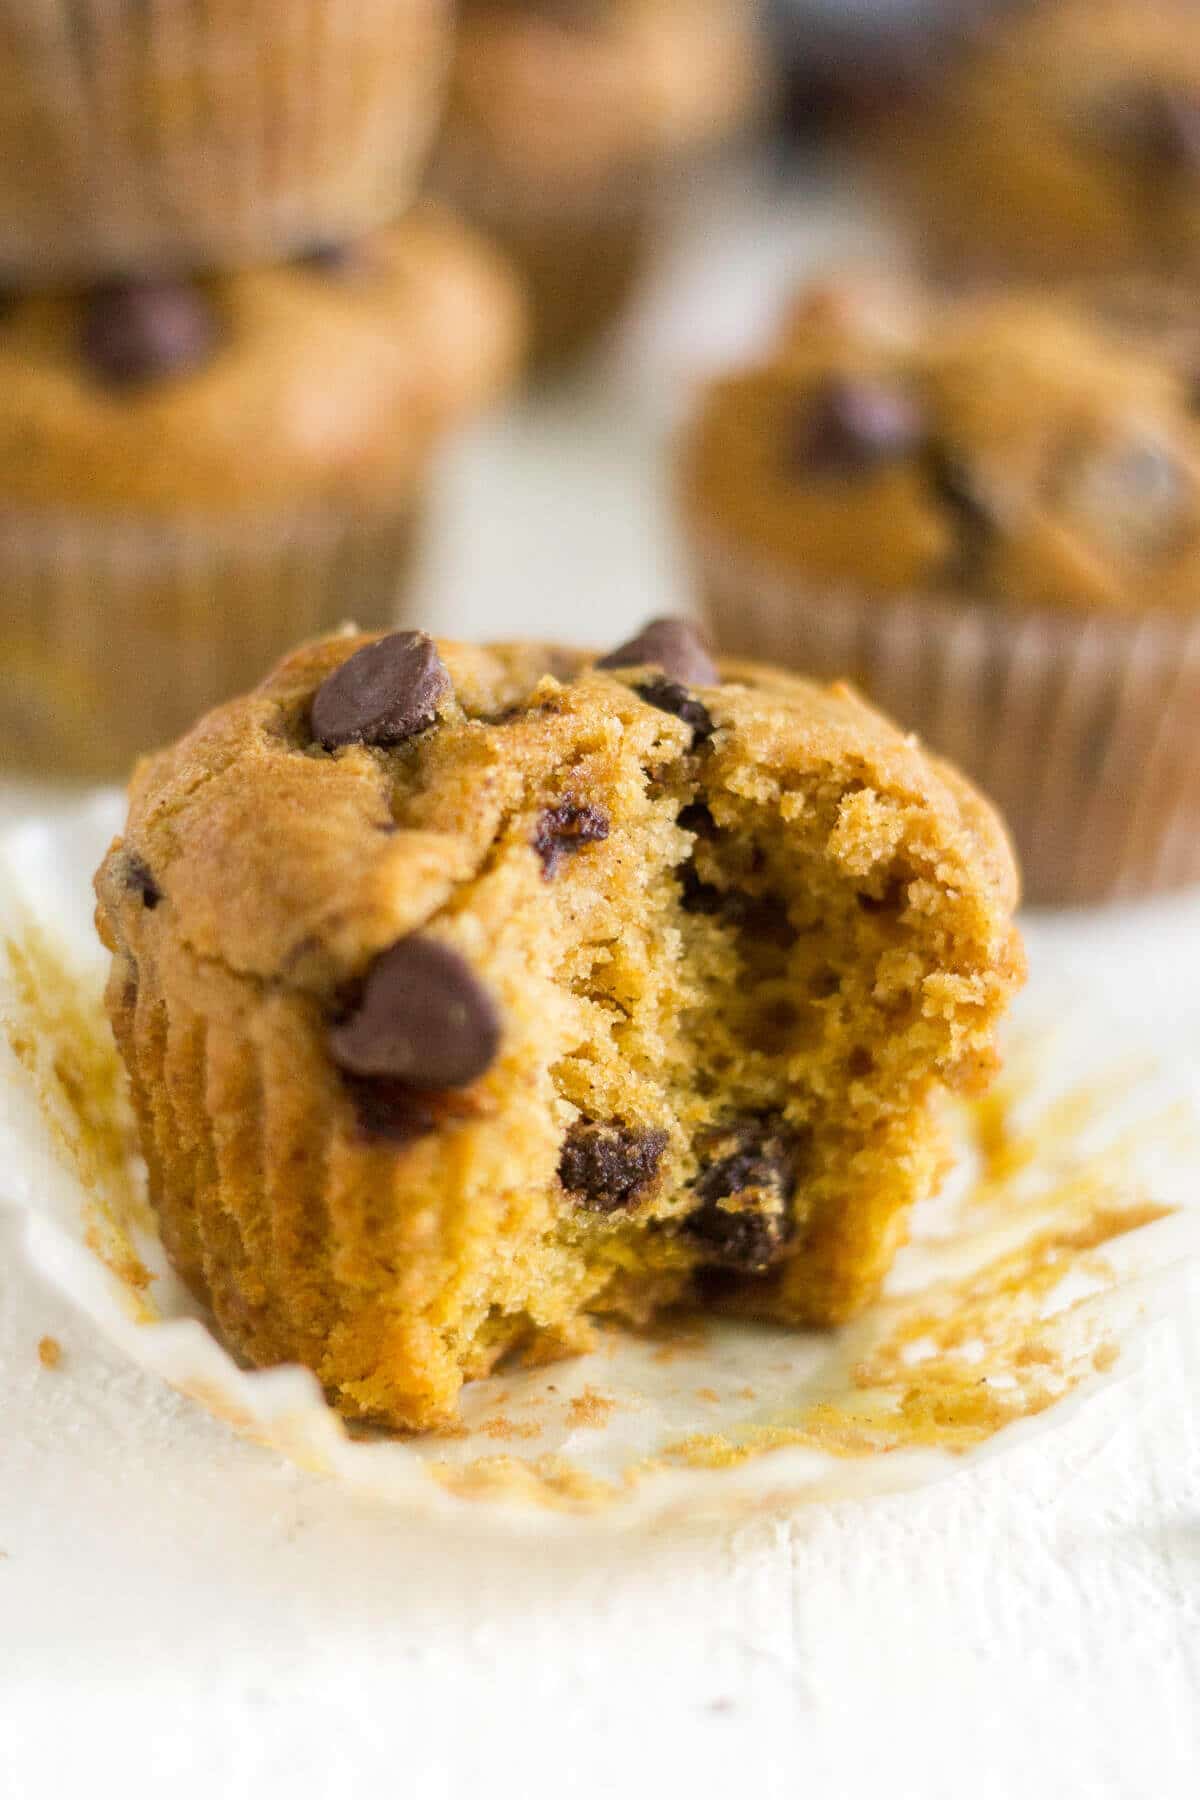 Soft and moist, these gluten free pumpkin muffins are filled with pure pumpkin, fall spices and chocolate chips. Enjoy a delicious muffin in the morning this fall without all the gluten!